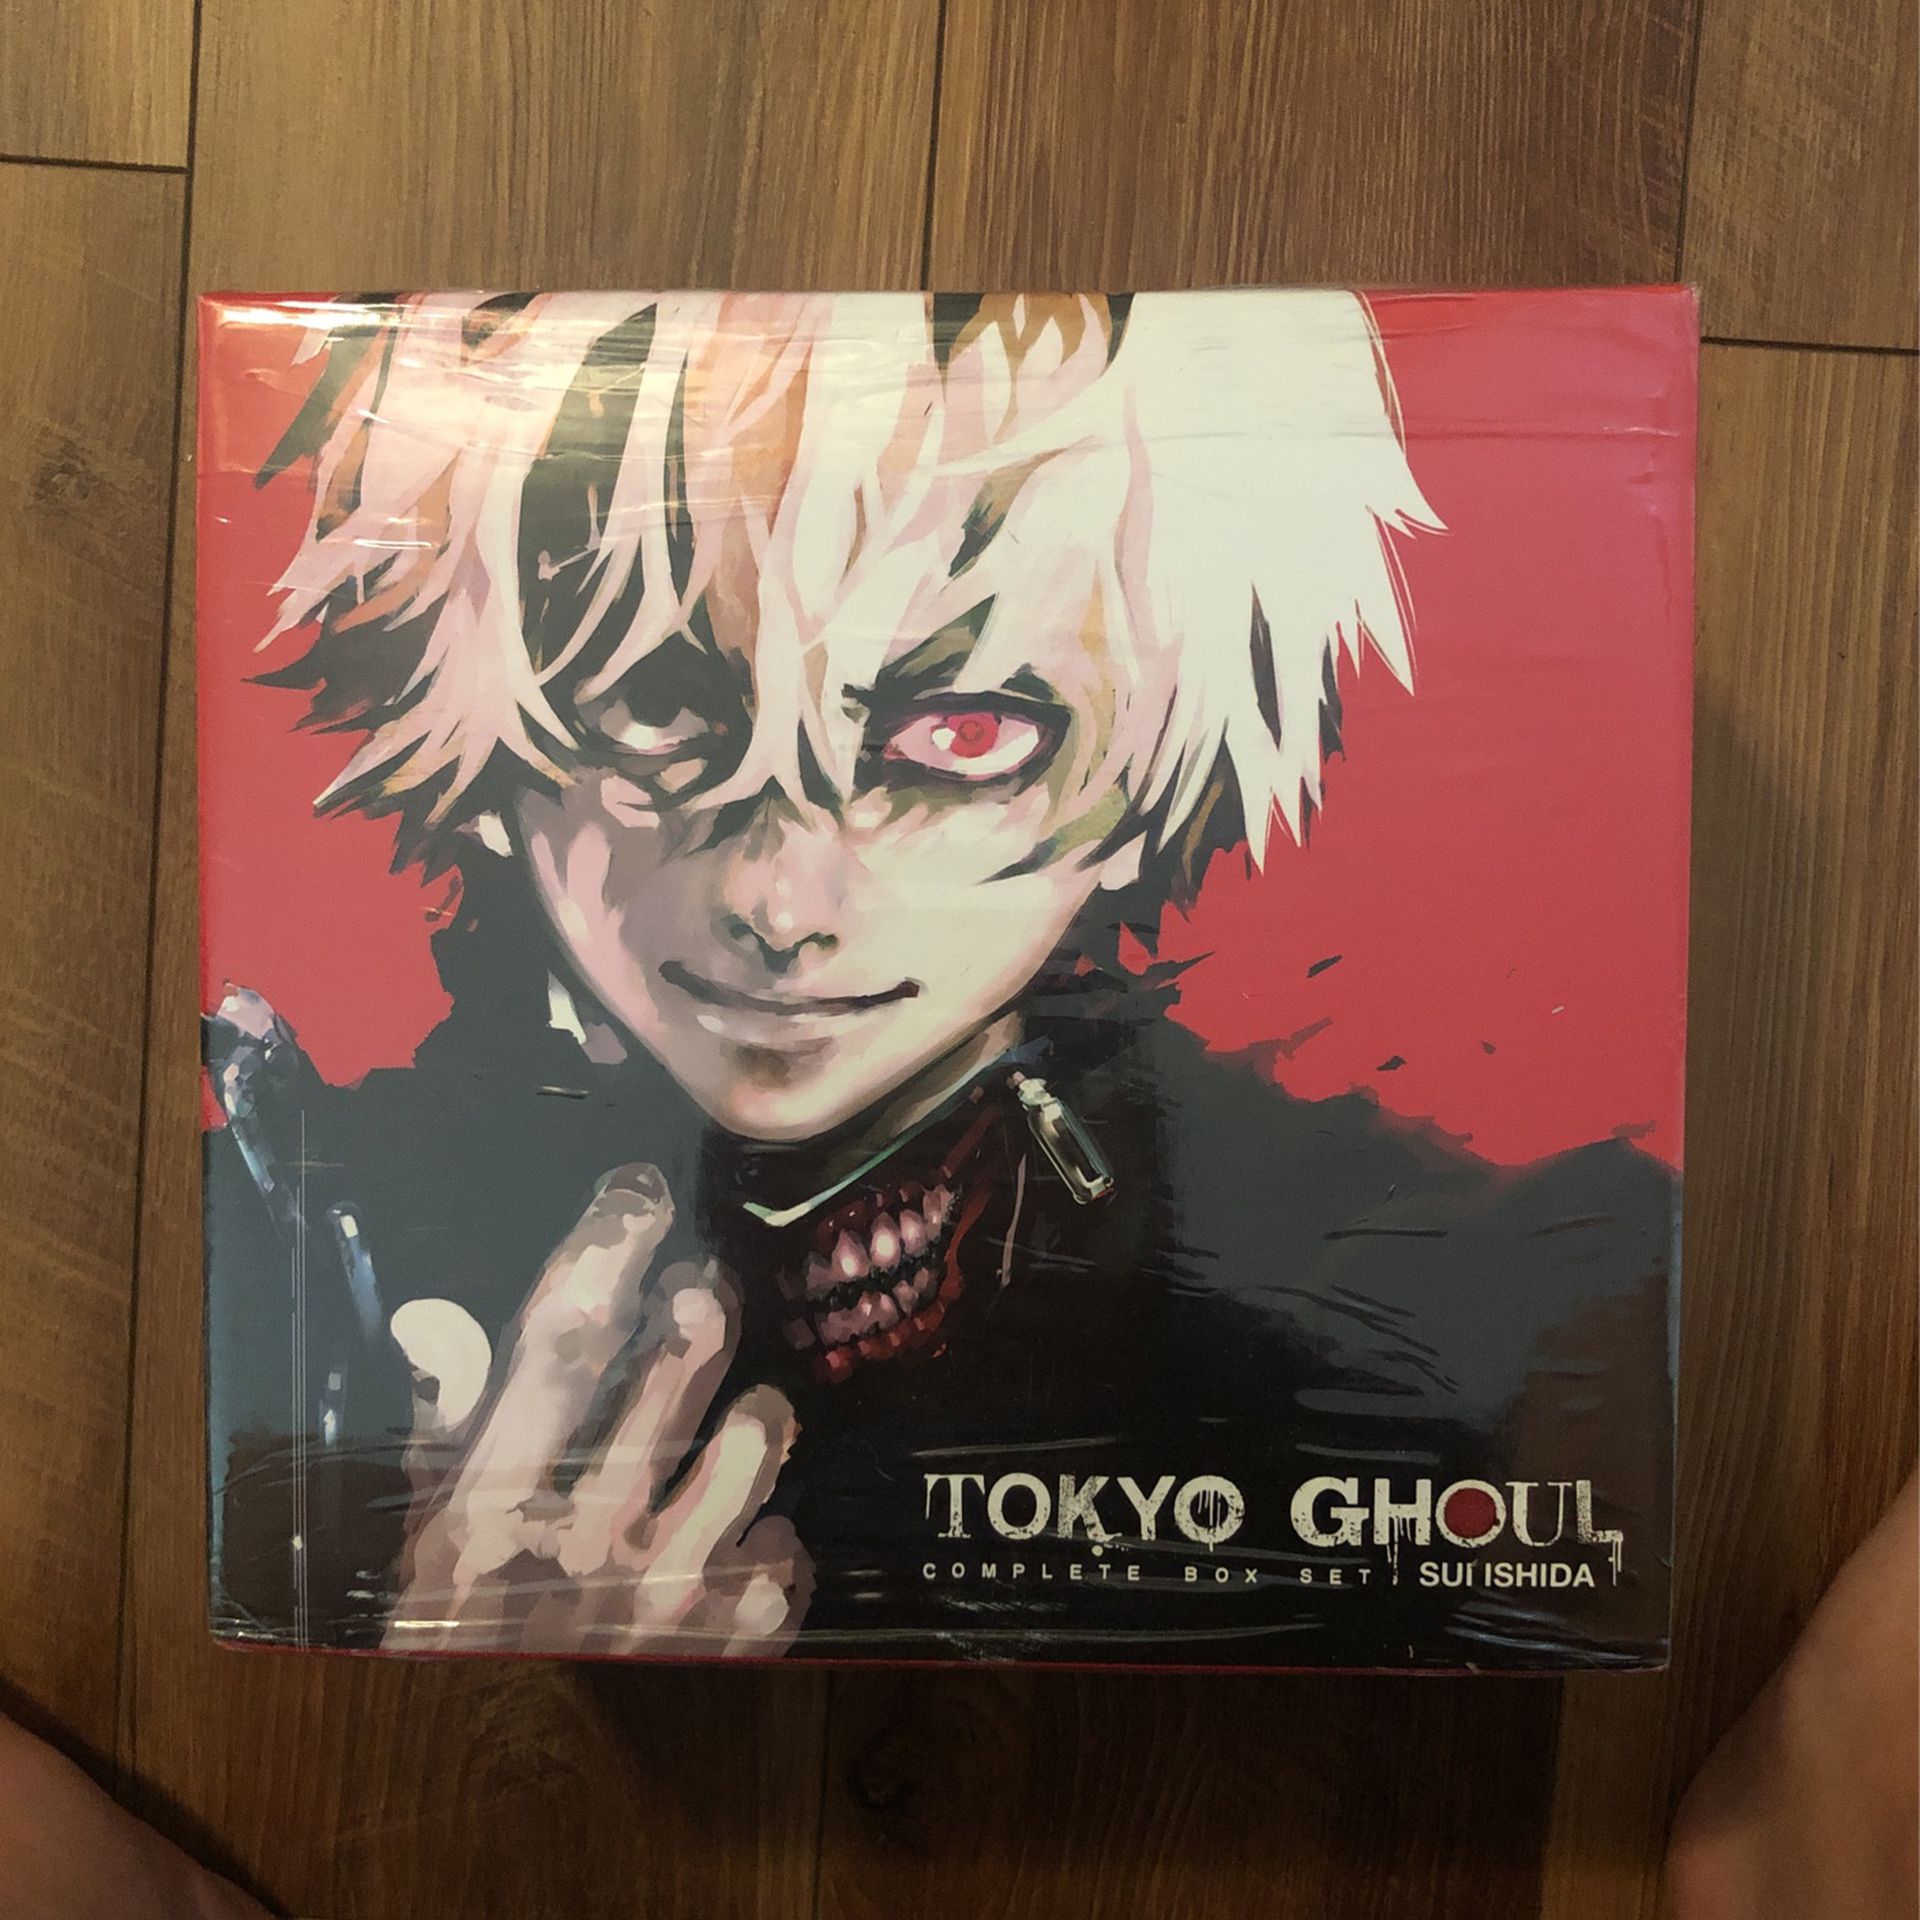 Anime Tokyo Ghoul Completo em Blu Ray